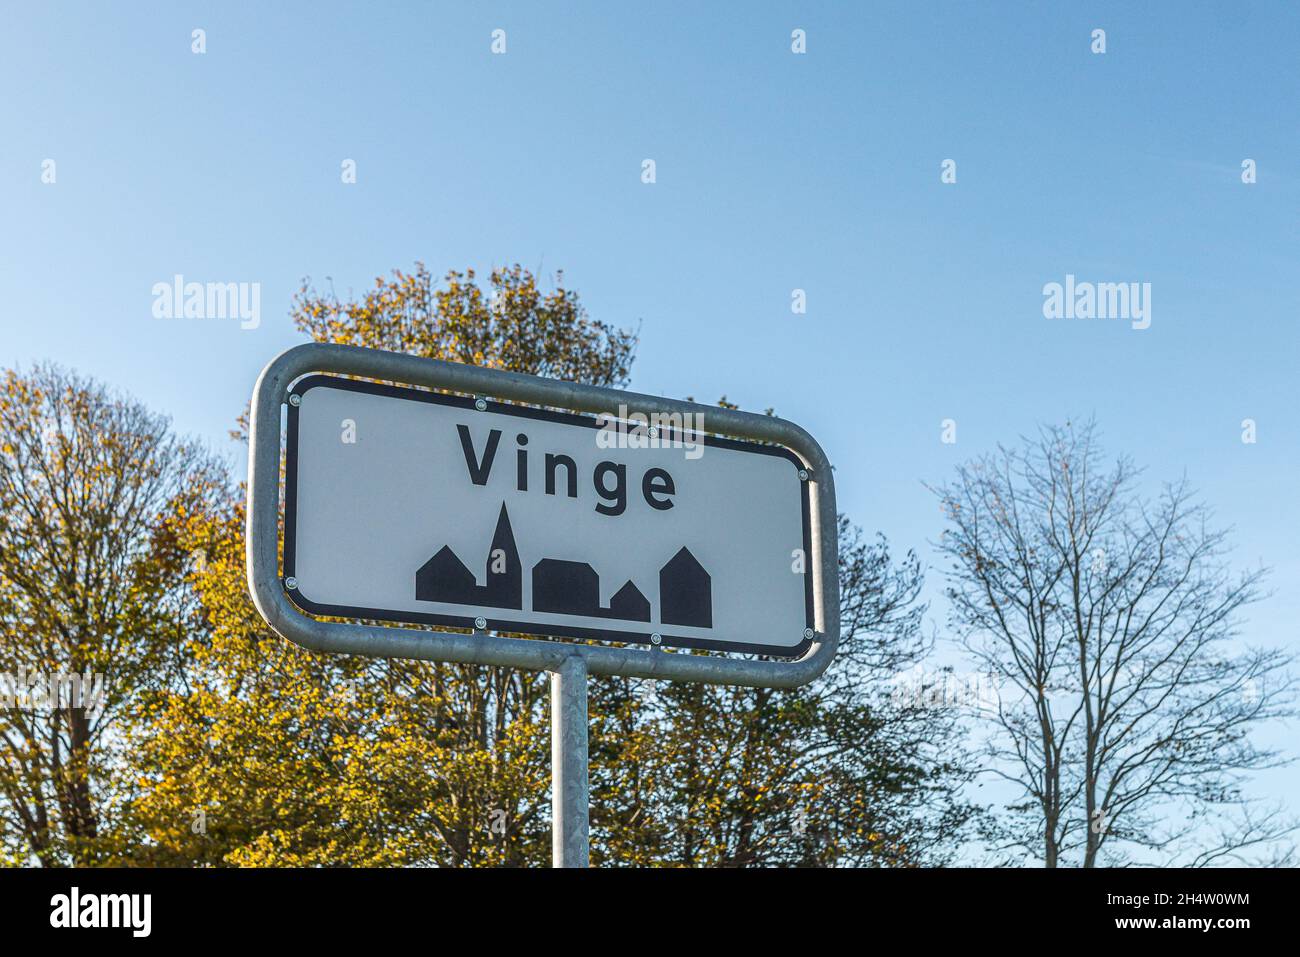 road sign of the suburb Vinge in Frederikssund, October 23, 2021 Stock Photo